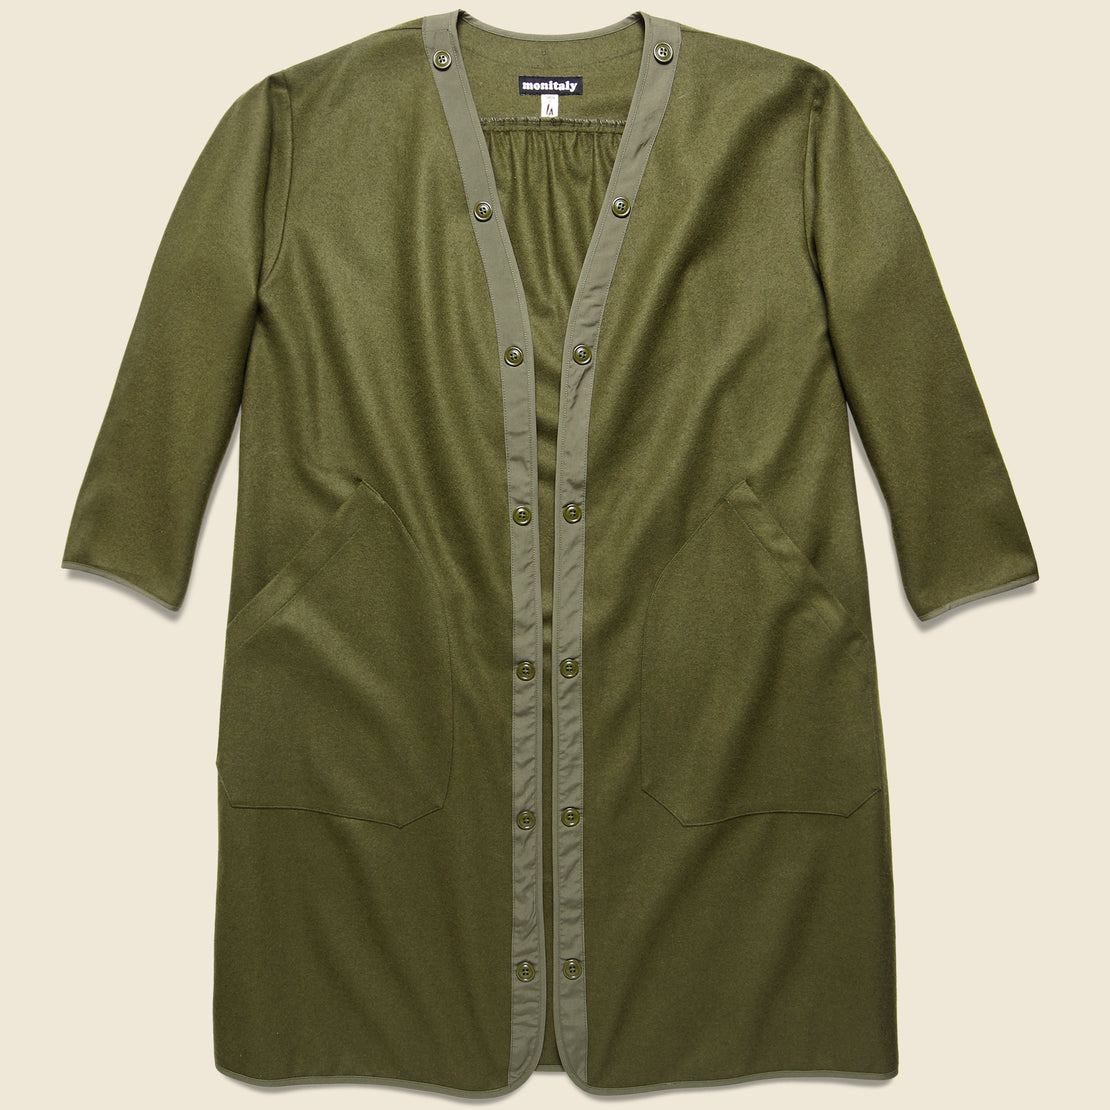 Monitaly Vancloth Oxford French Army Trench Coat - Olive